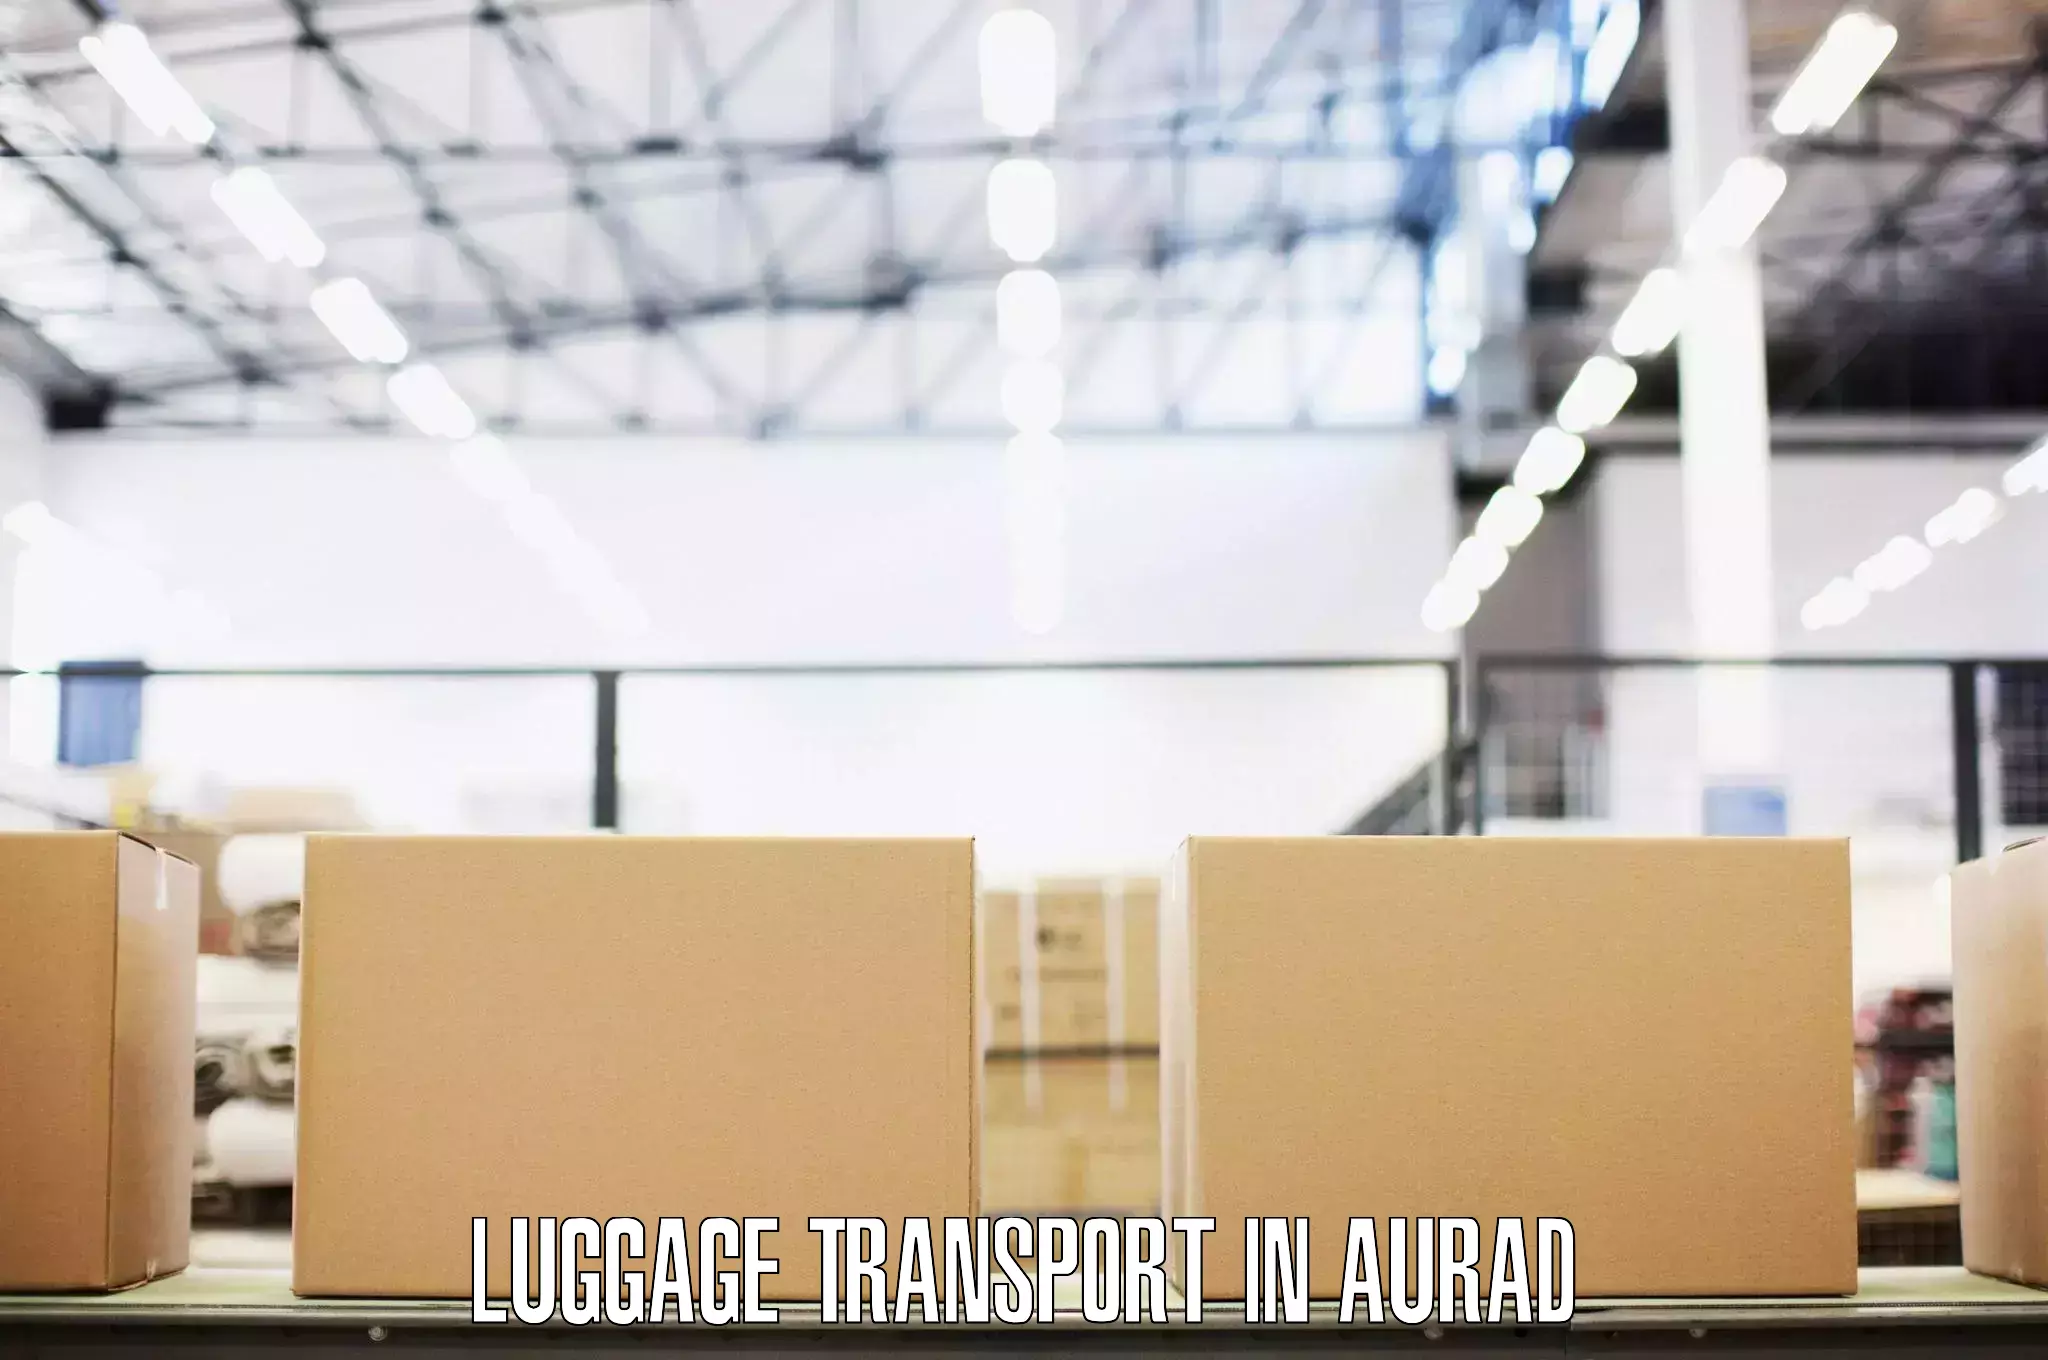 Long distance luggage transport in Aurad